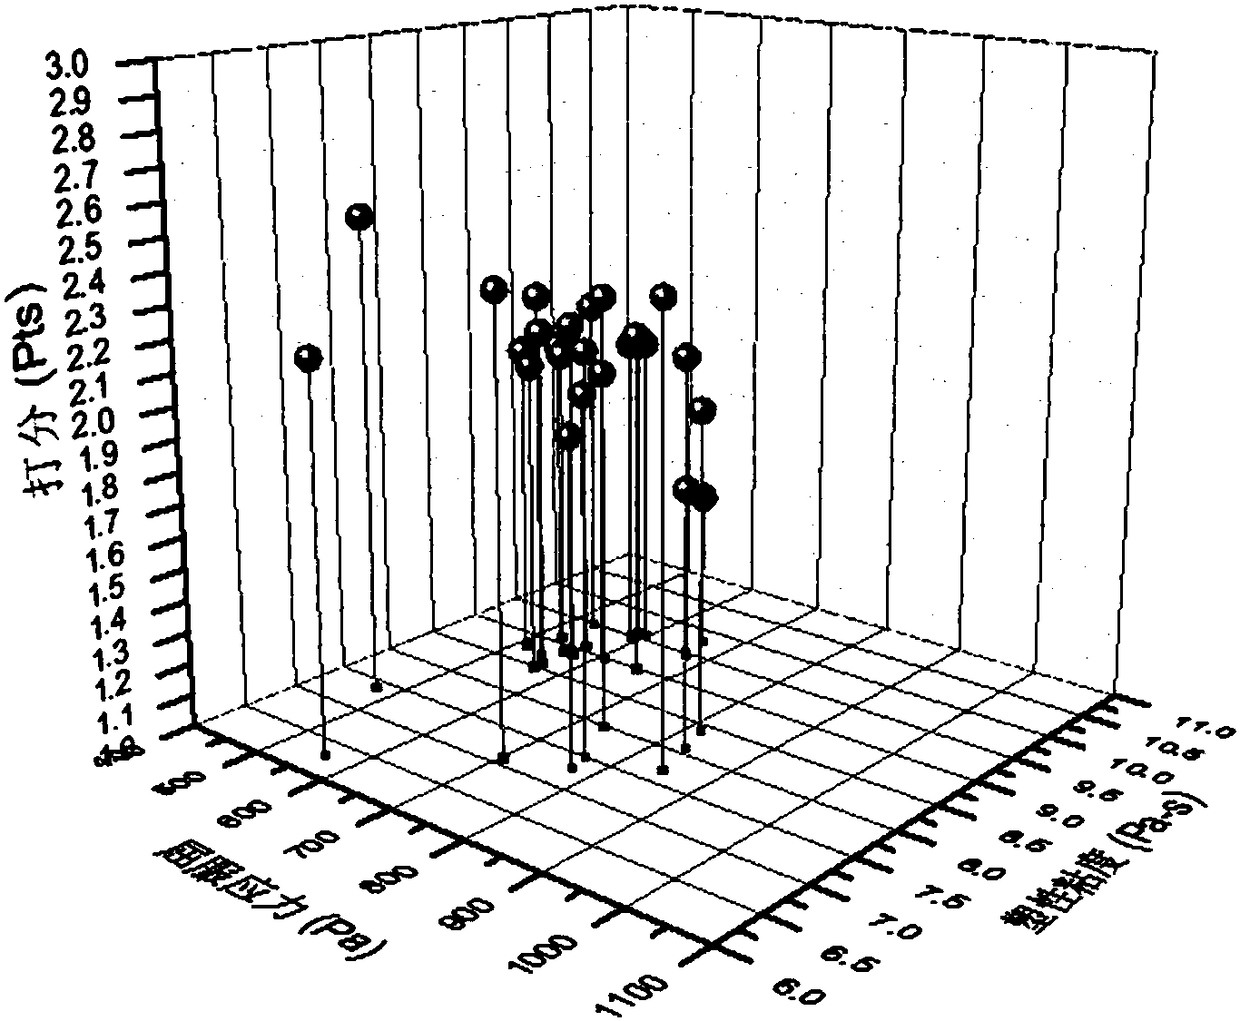 A method for measuring rheological parameter range of wall surface putty construction